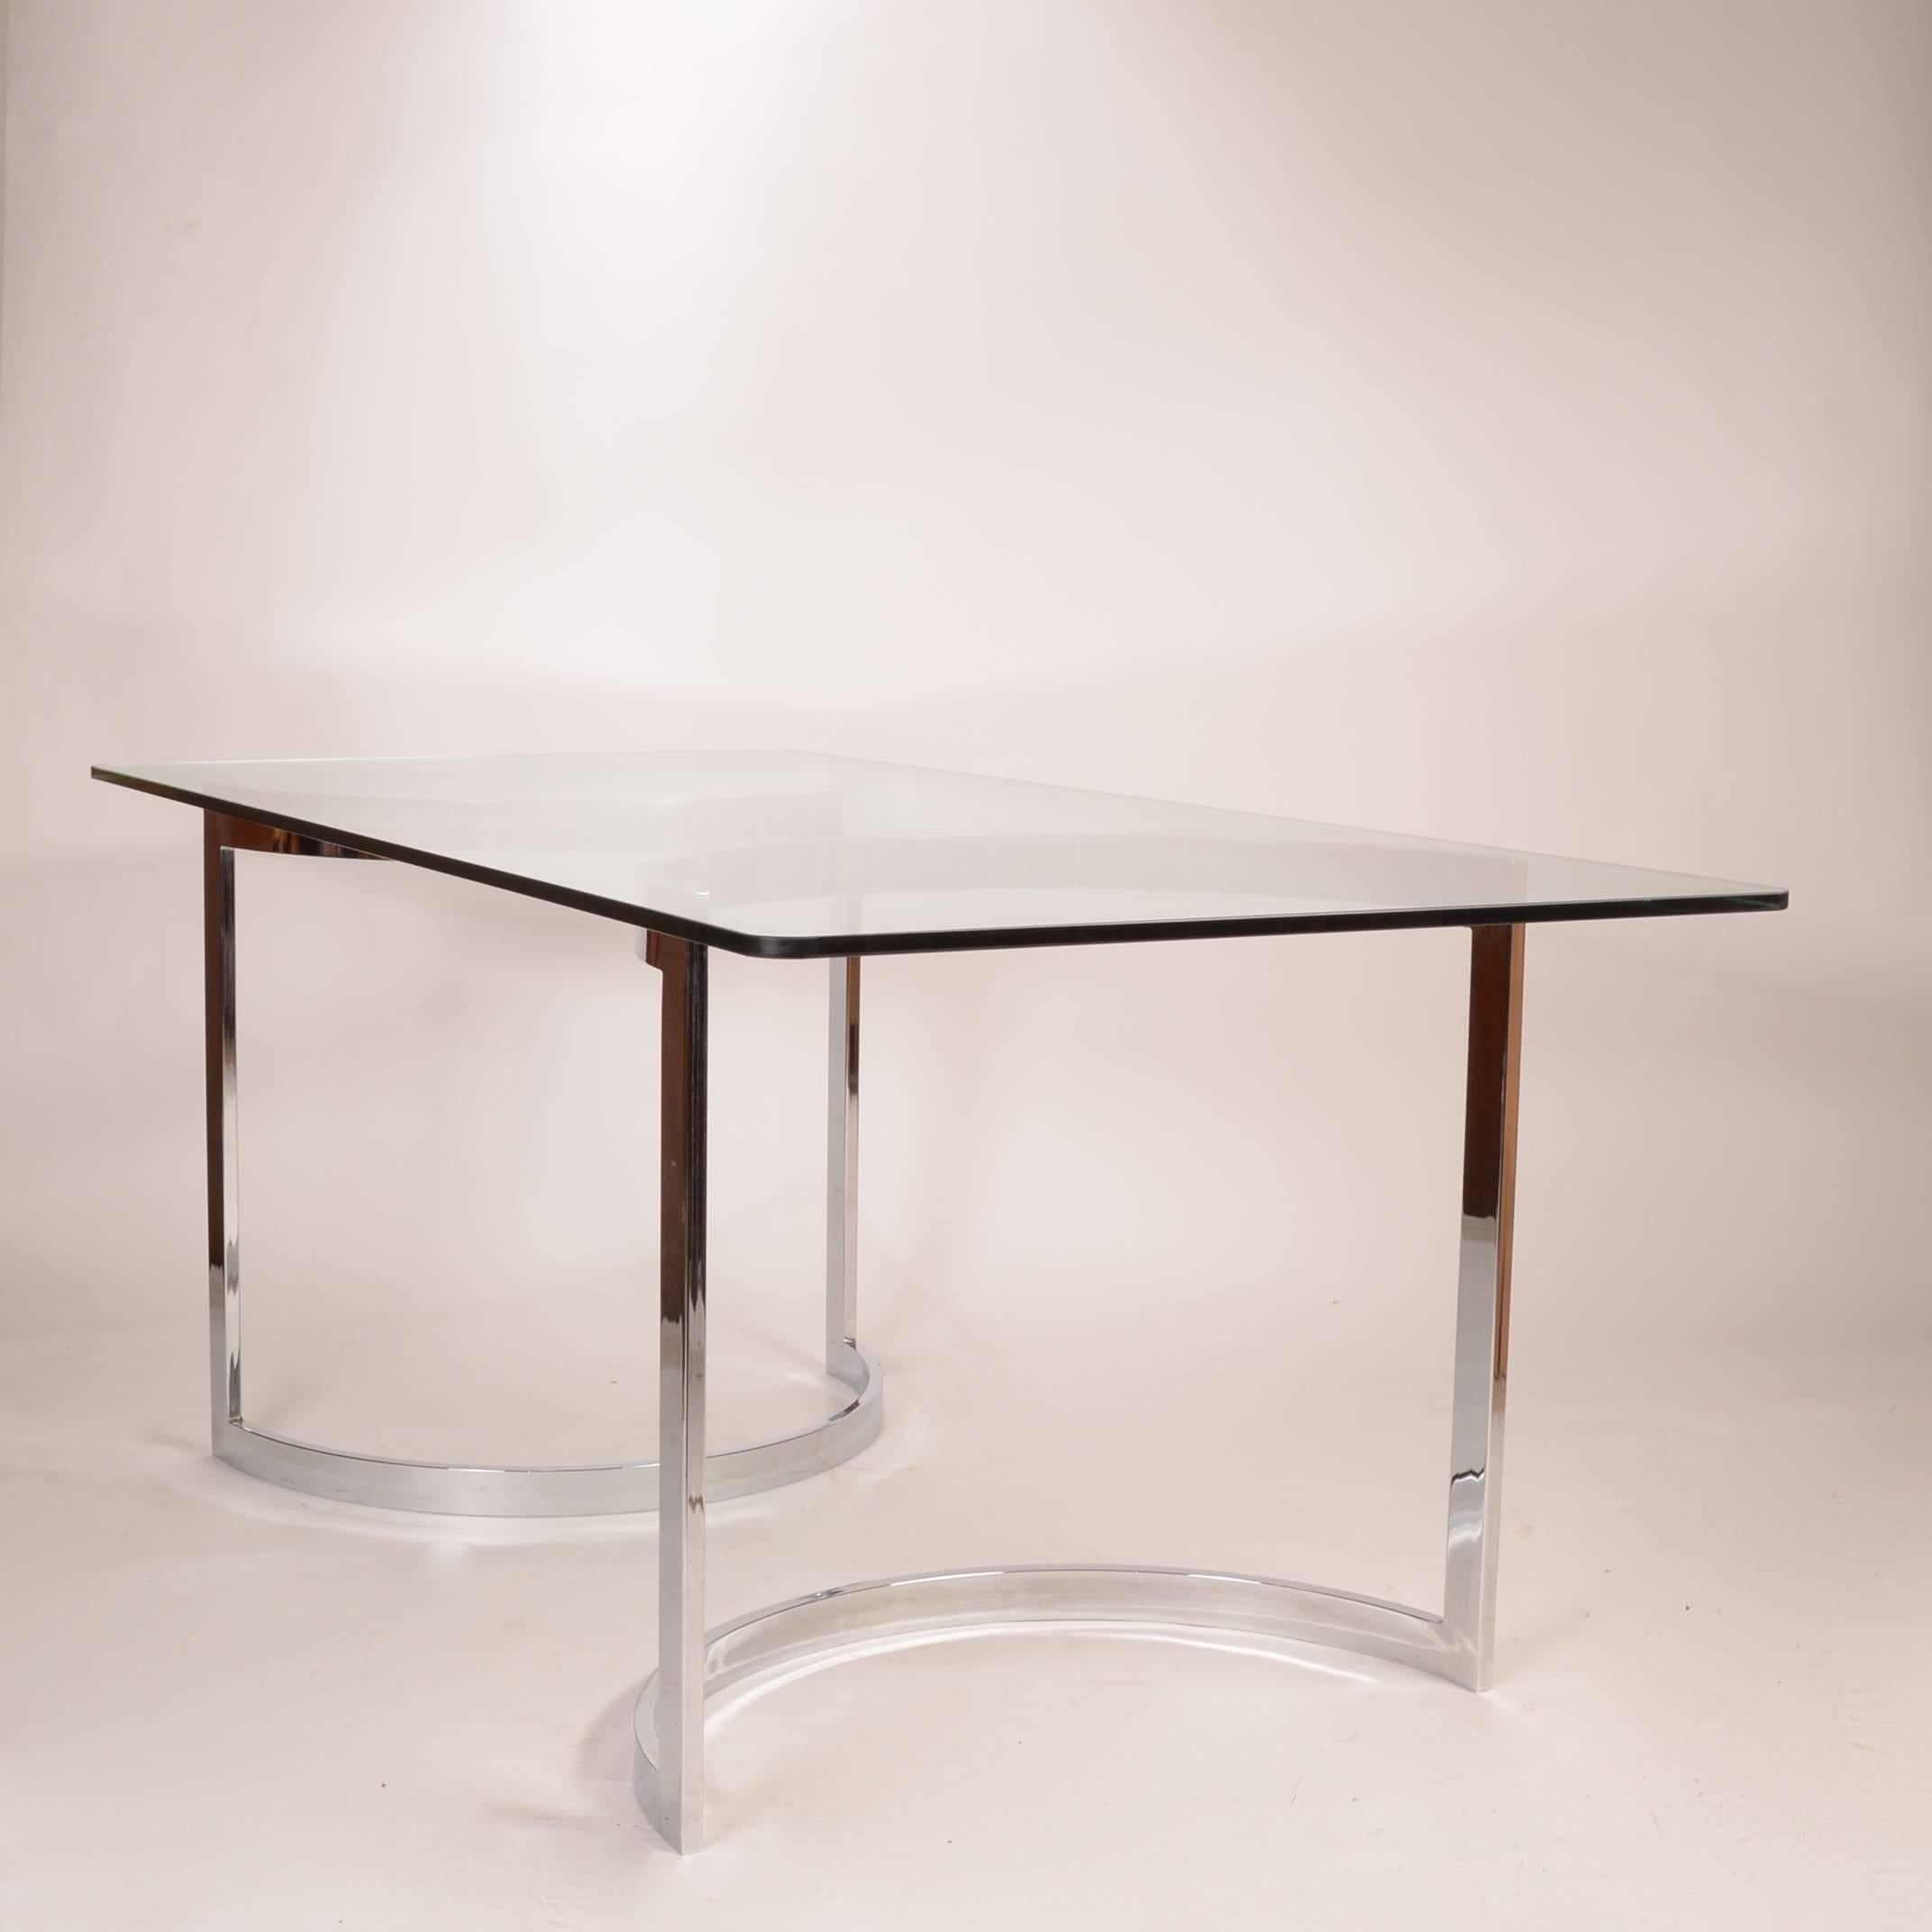 This is a beautiful dining table in the style of Milo Baughman.  The legs can be arranged in a variety of positions.  The glass is in excellent condition.  